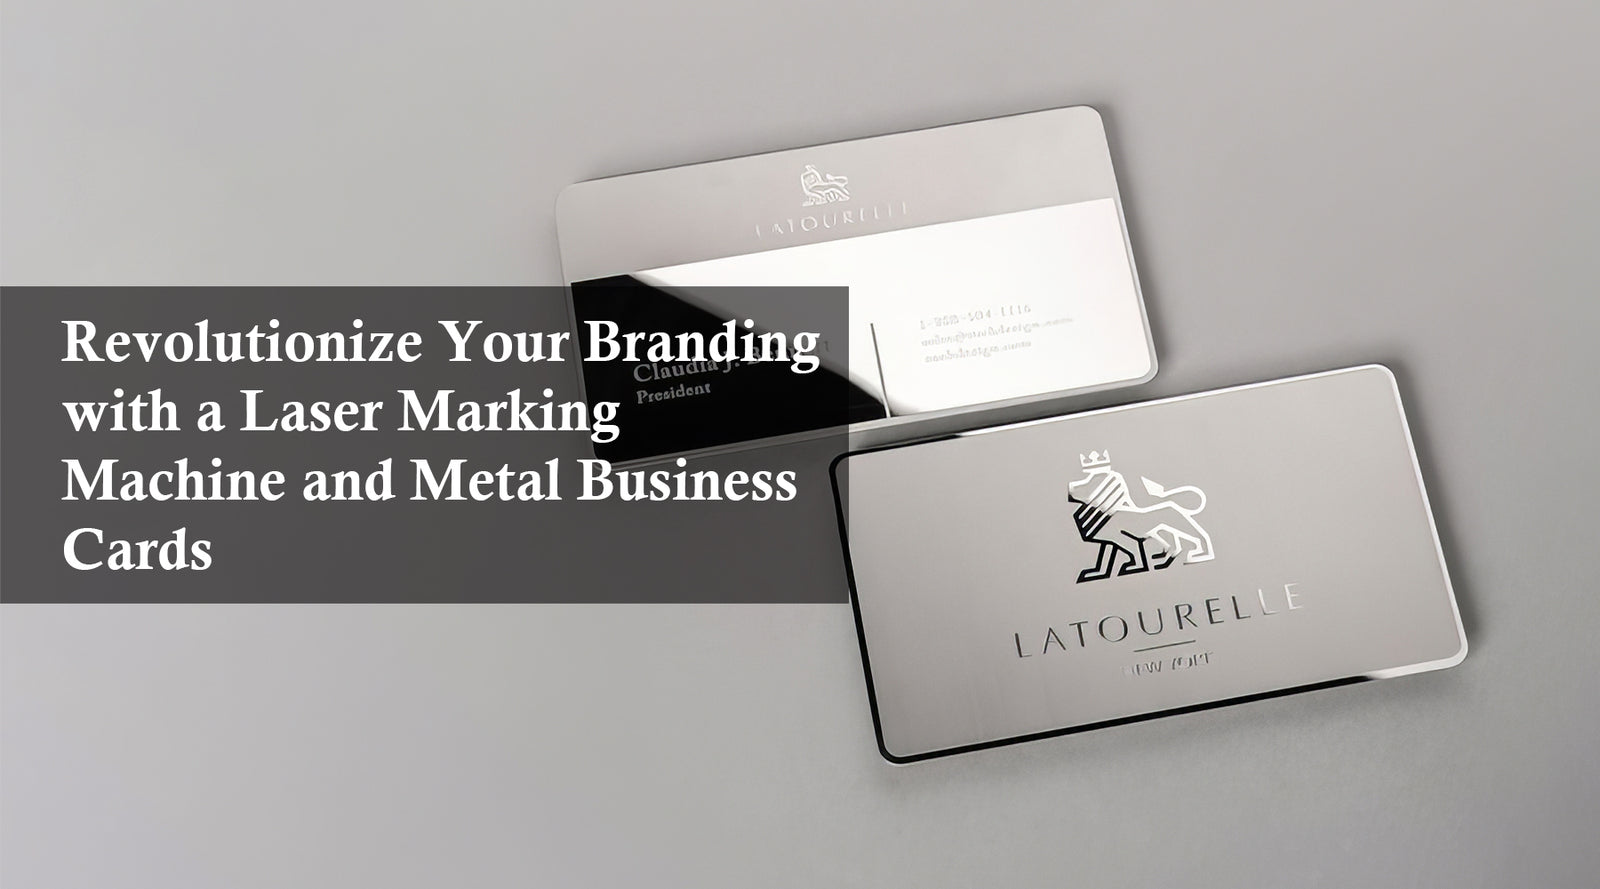 Revolutionize Your Branding with a Laser Marking Machine and Metal Business Cards